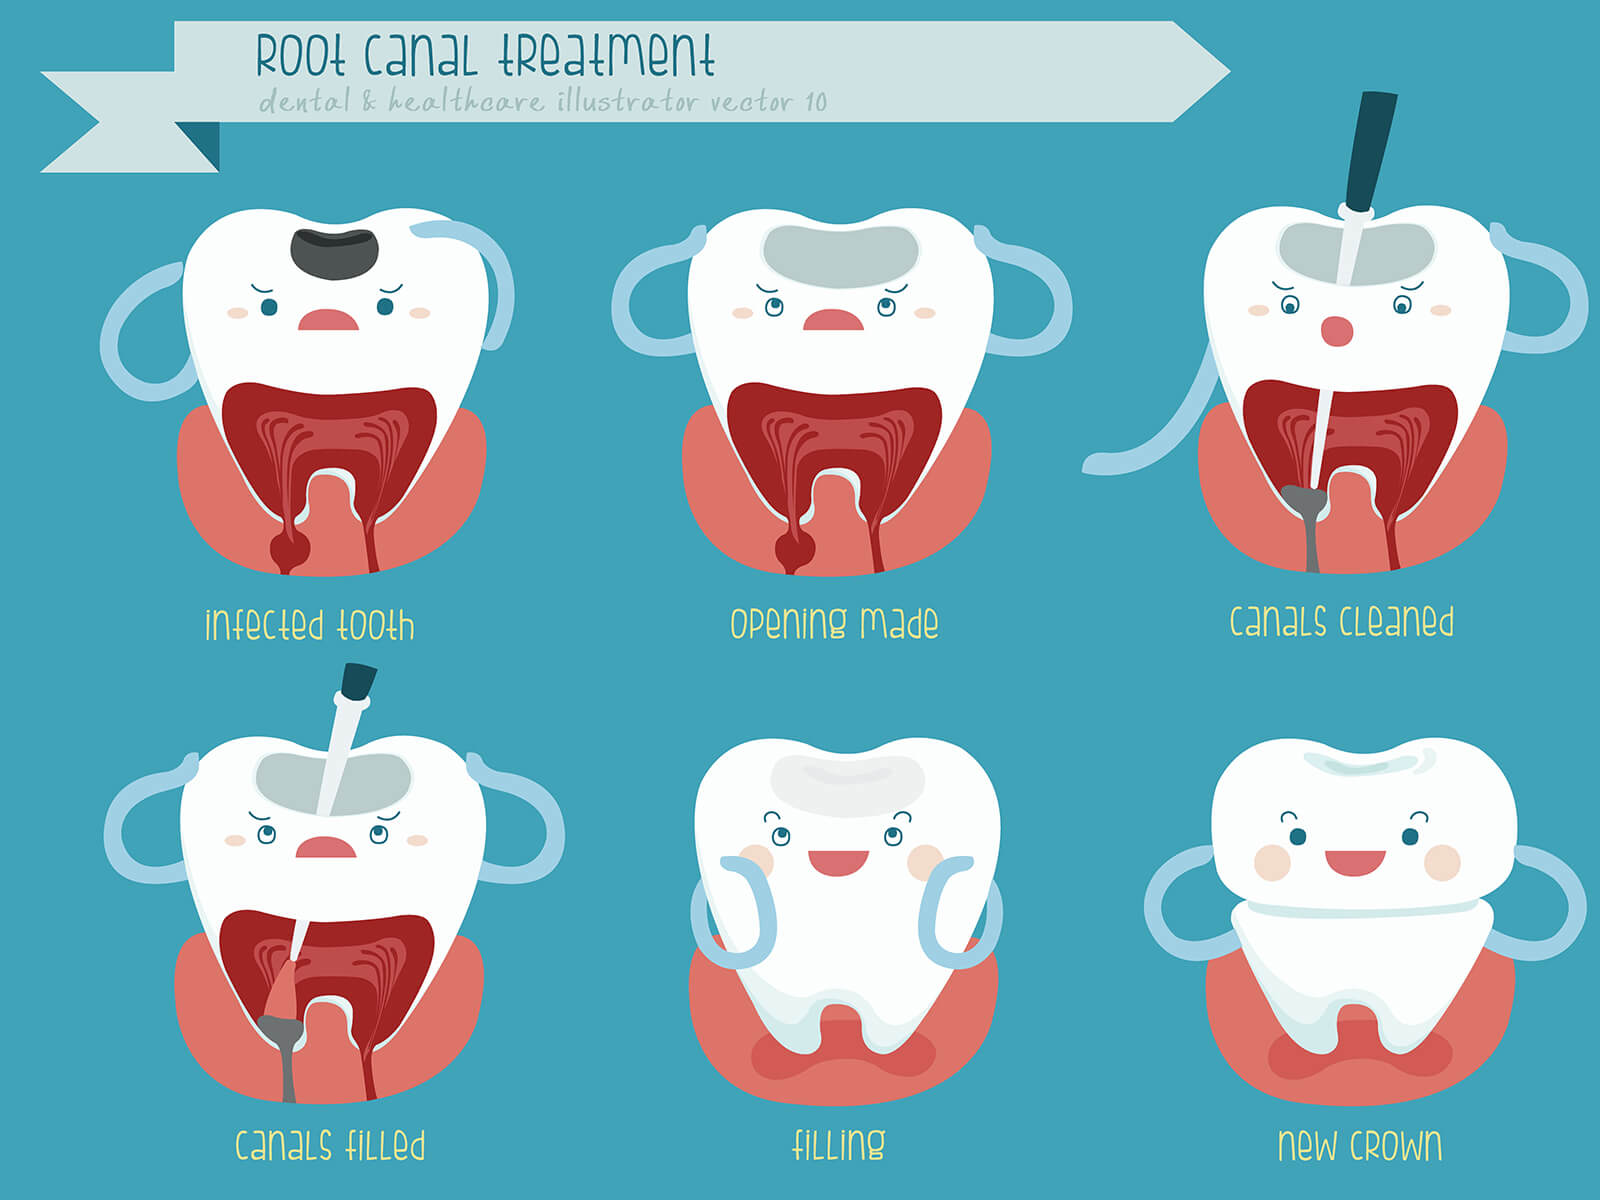 How Does Root Canal Therapy Treat Decayed Teeth